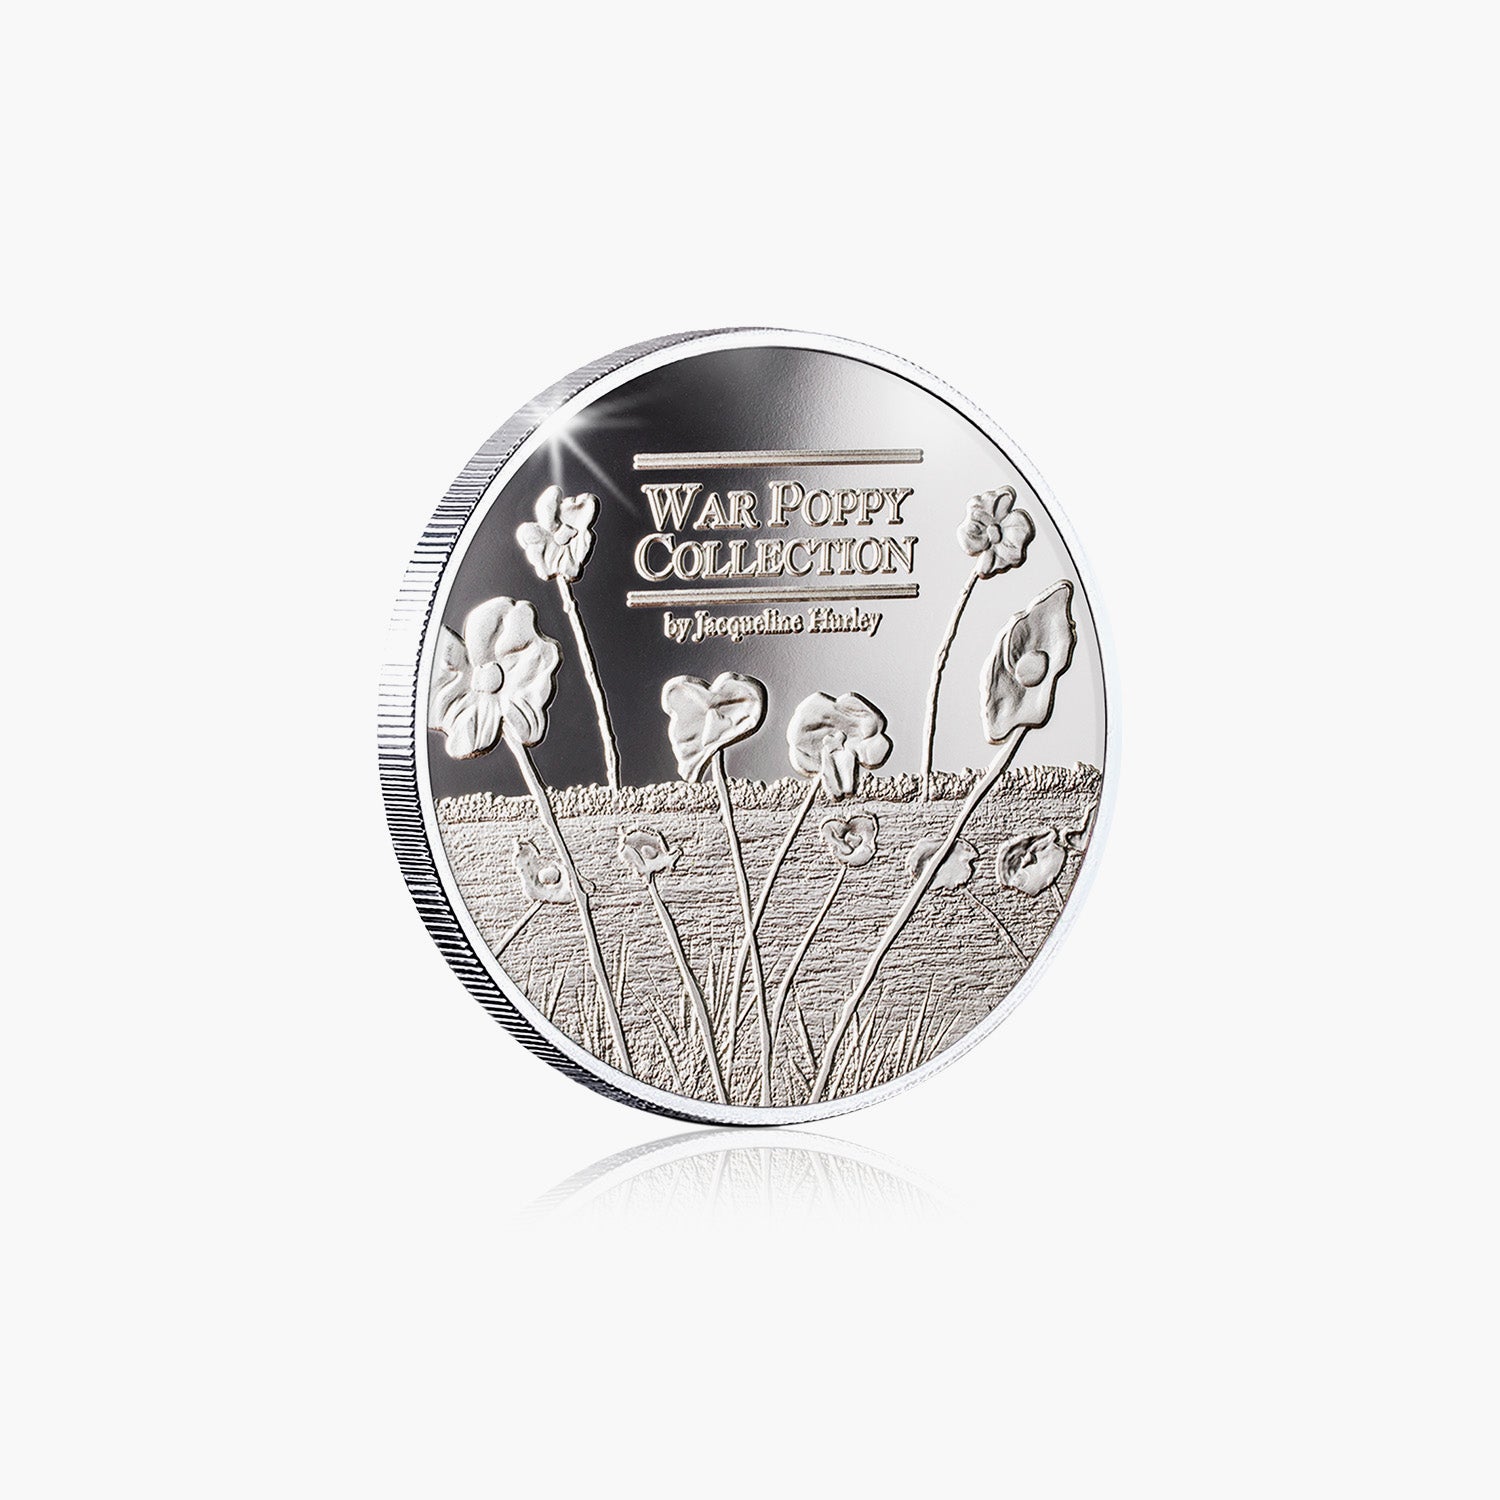 Medic On The Mountain Silver-Plated Commemorative